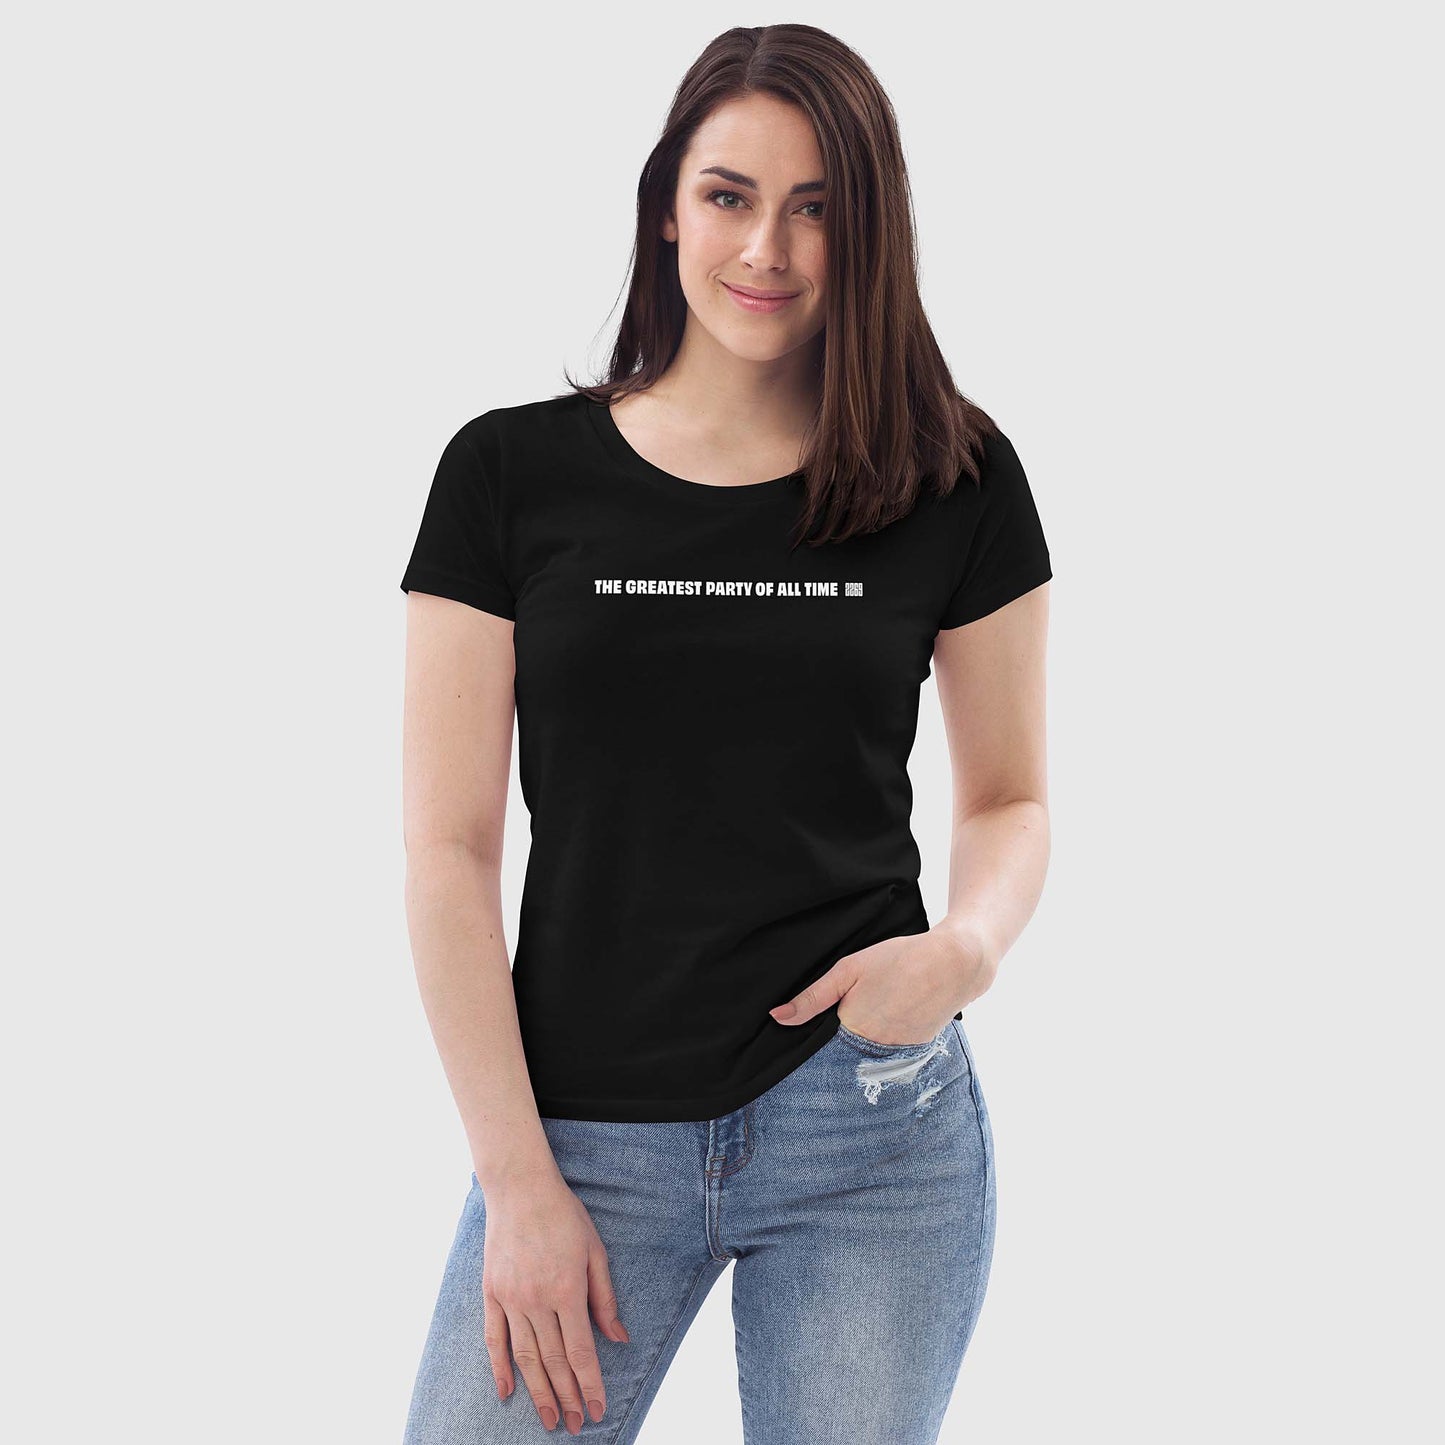 Women's black fitted organic cotton t-shirt with English 2269 party message